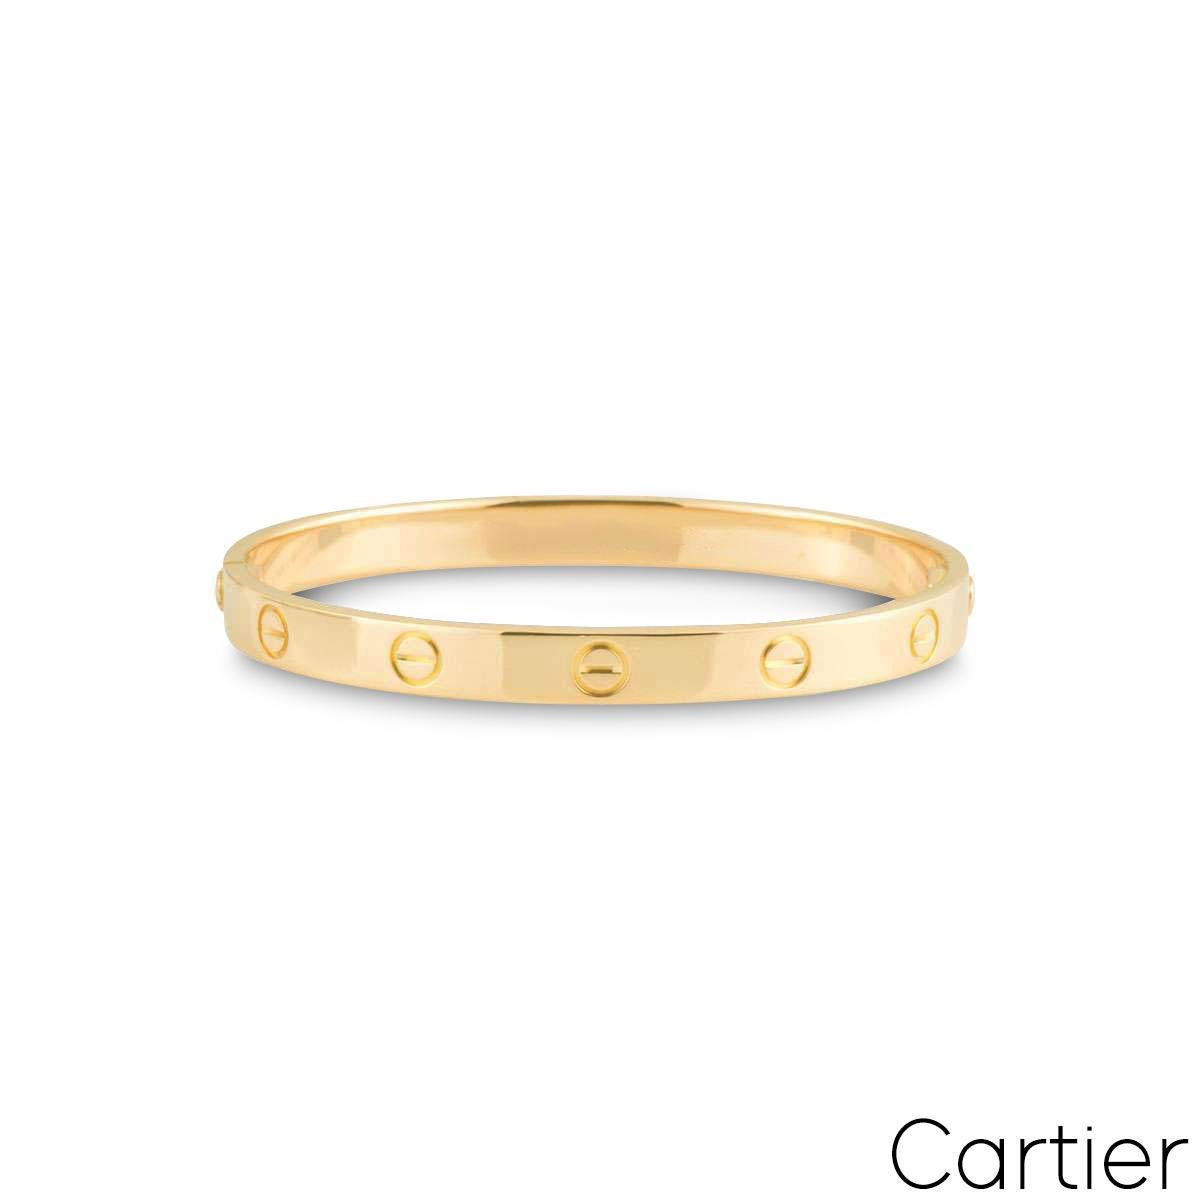 An 18k yellow gold Cartier bracelet from the Love collection. The bracelet has the screw motif displayed around the outer edge and features the new style screw fitting. This bracelet is a size 16 and has a gross weight 29.9 grams. 

The bracelet